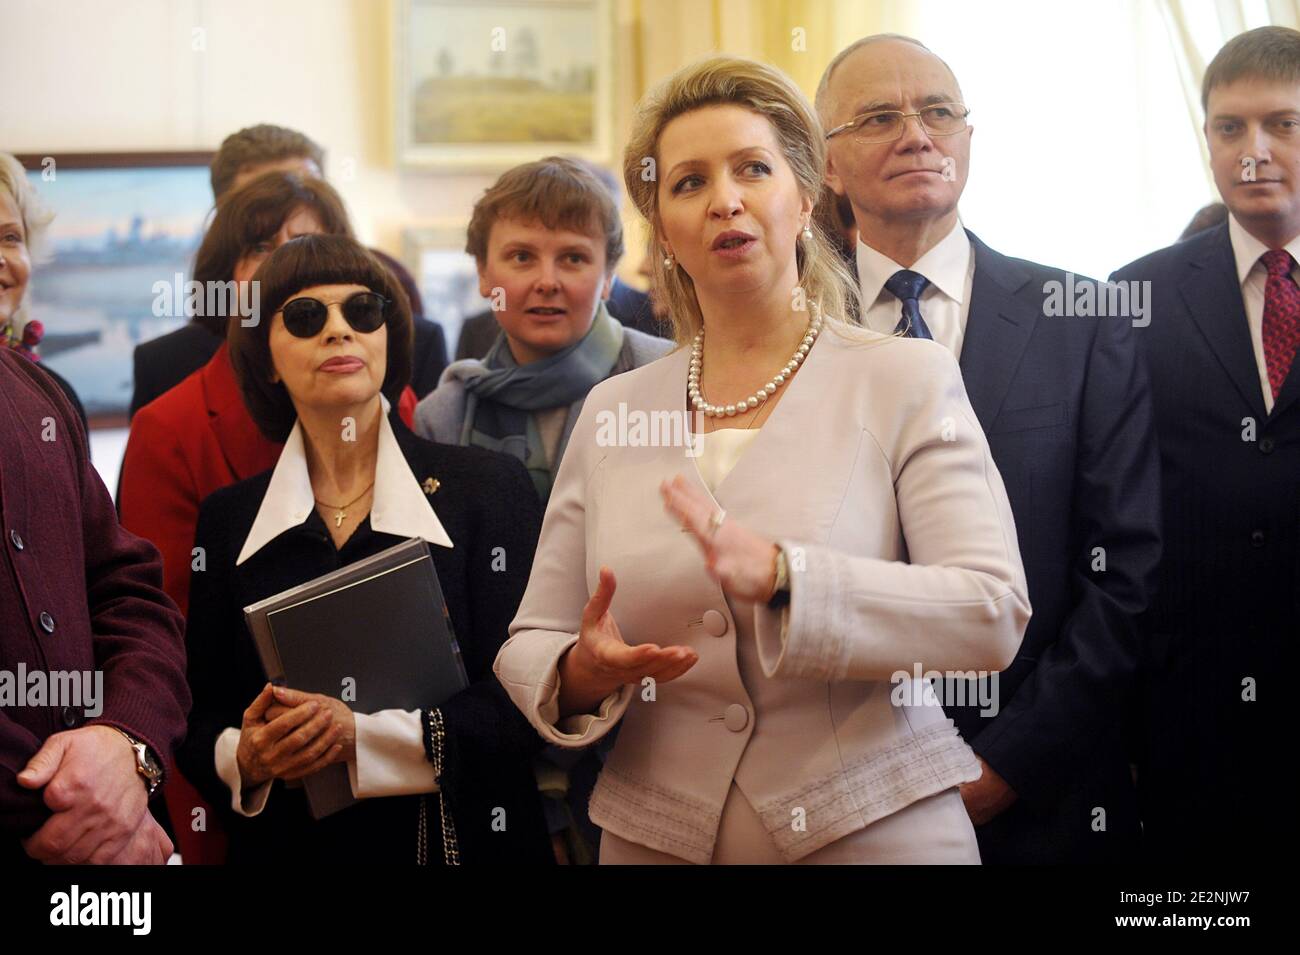 Russia's First Lady Svetlana Medvedeva flanked by French singer Mireille Mathieu visits the Exhibition 'Une Fenetre Sur La Russie' at the Russian Culture and Science Center in Paris, France on March 2, 2010. Photo by Giancarlo Gorassini/ABACAPRESS.COM Stock Photo